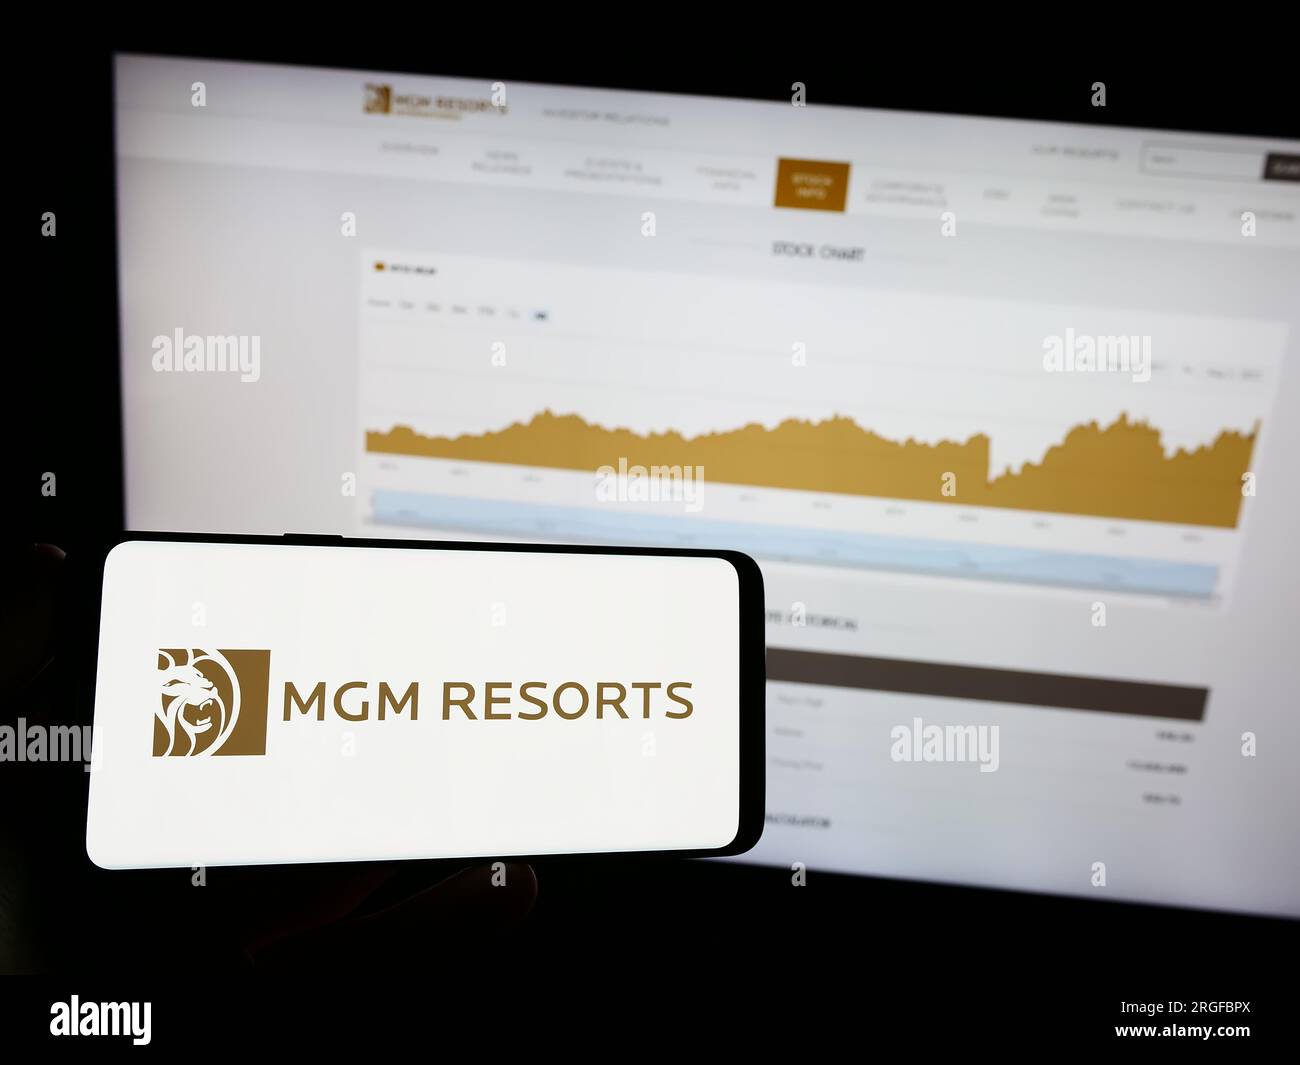 Person holding mobile phone with logo of hospitality company MGM Resorts International on screen in front of web page. Focus on phone display. Stock Photo